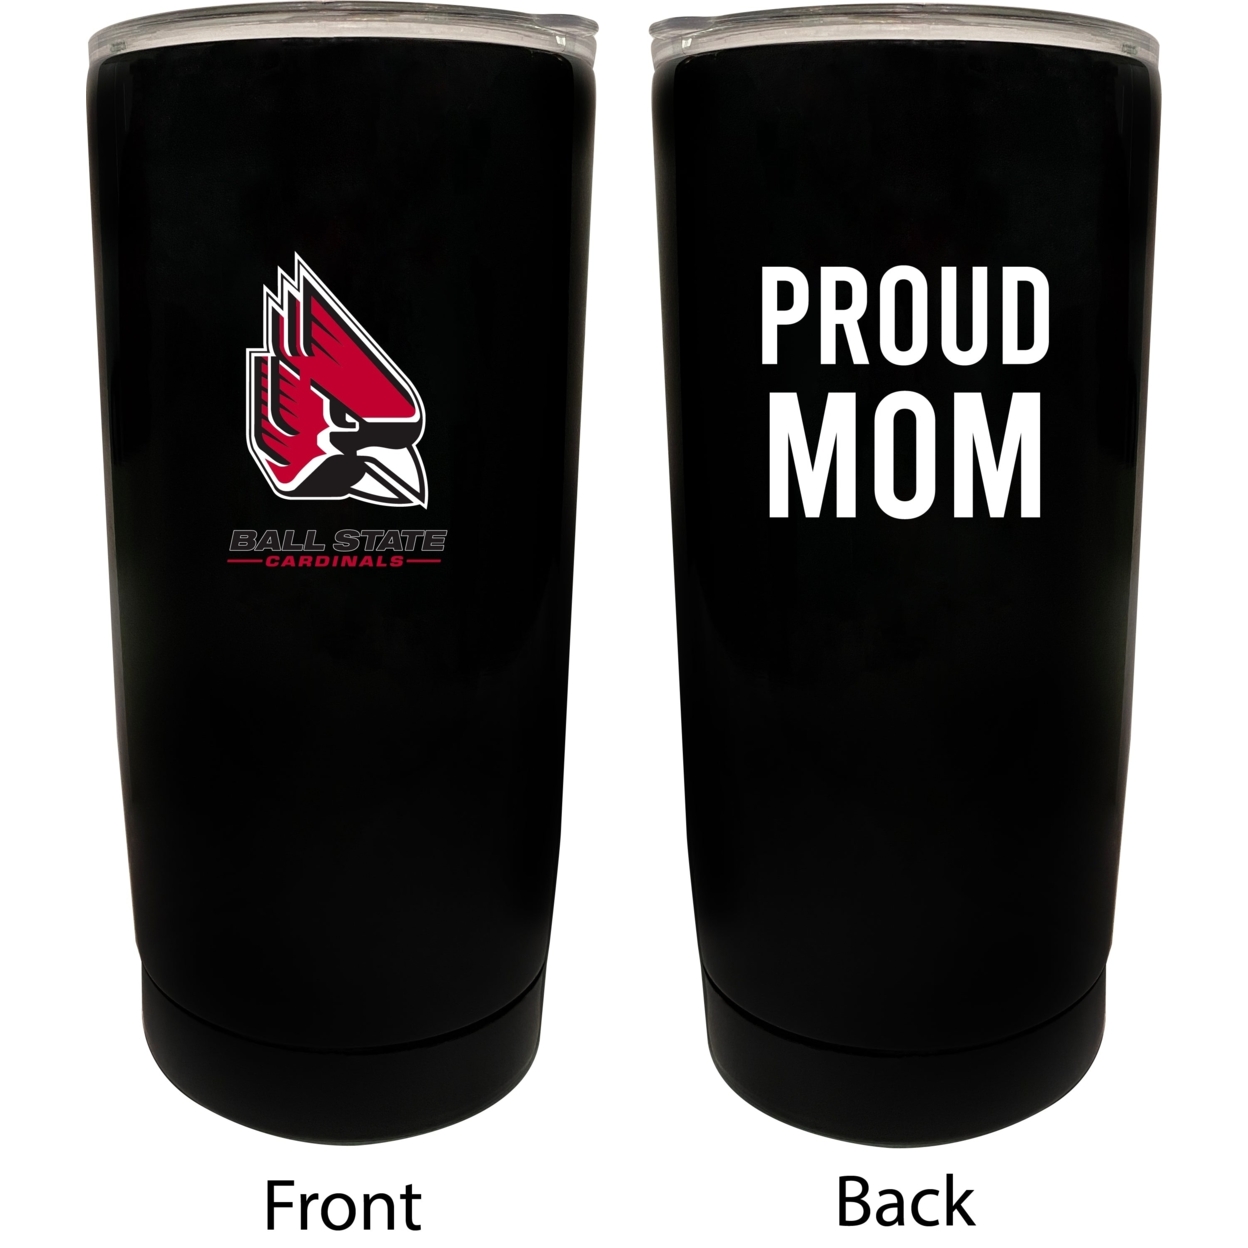 Ball State University Proud Mom 16 Oz Insulated Stainless Steel Tumblers